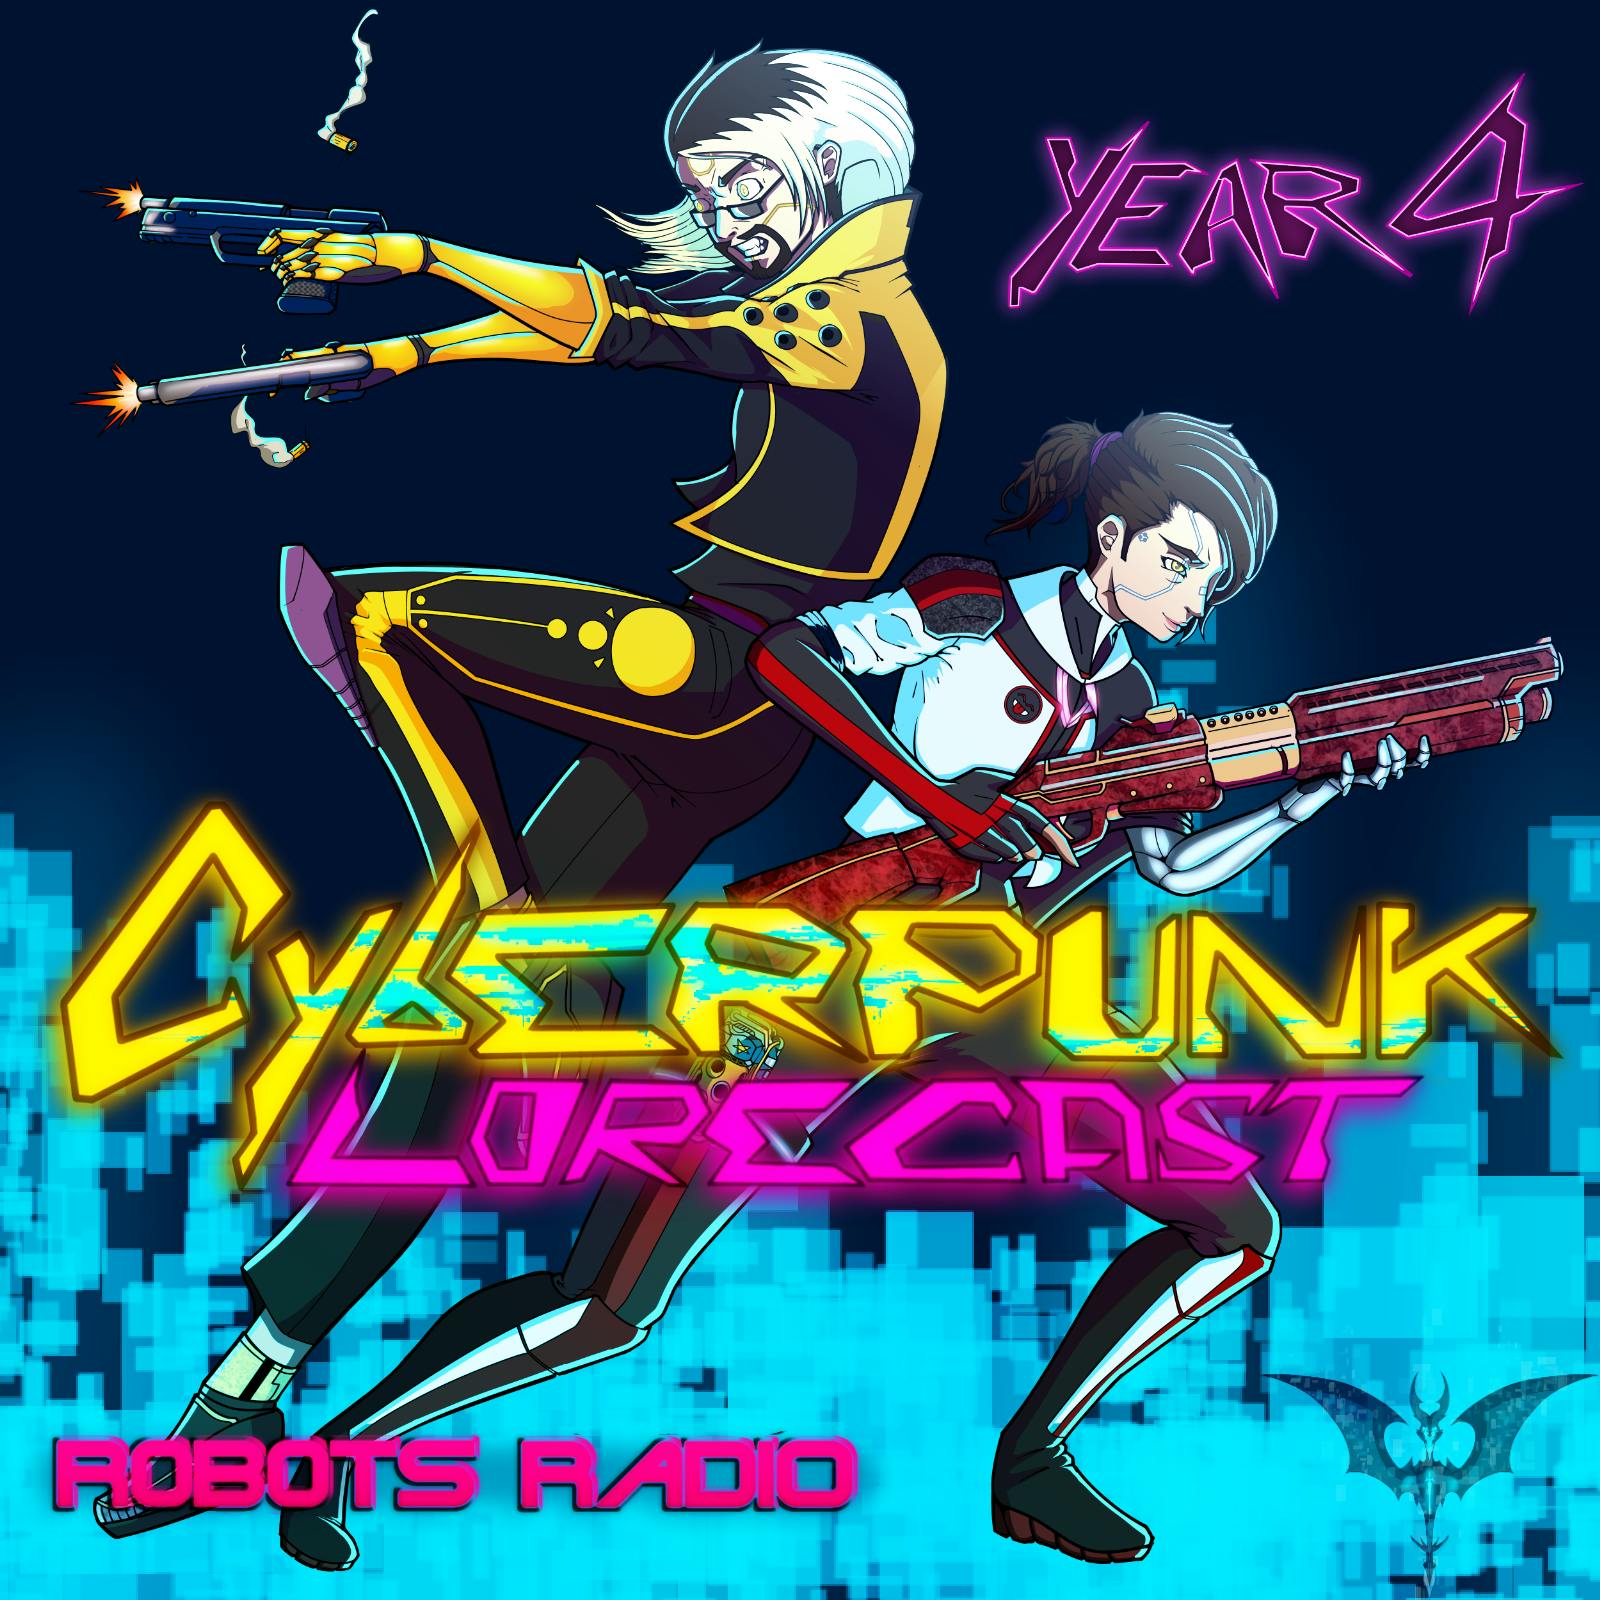 168: Cyberpunk we are thankful, Moments in 2077 we love with the Patrons